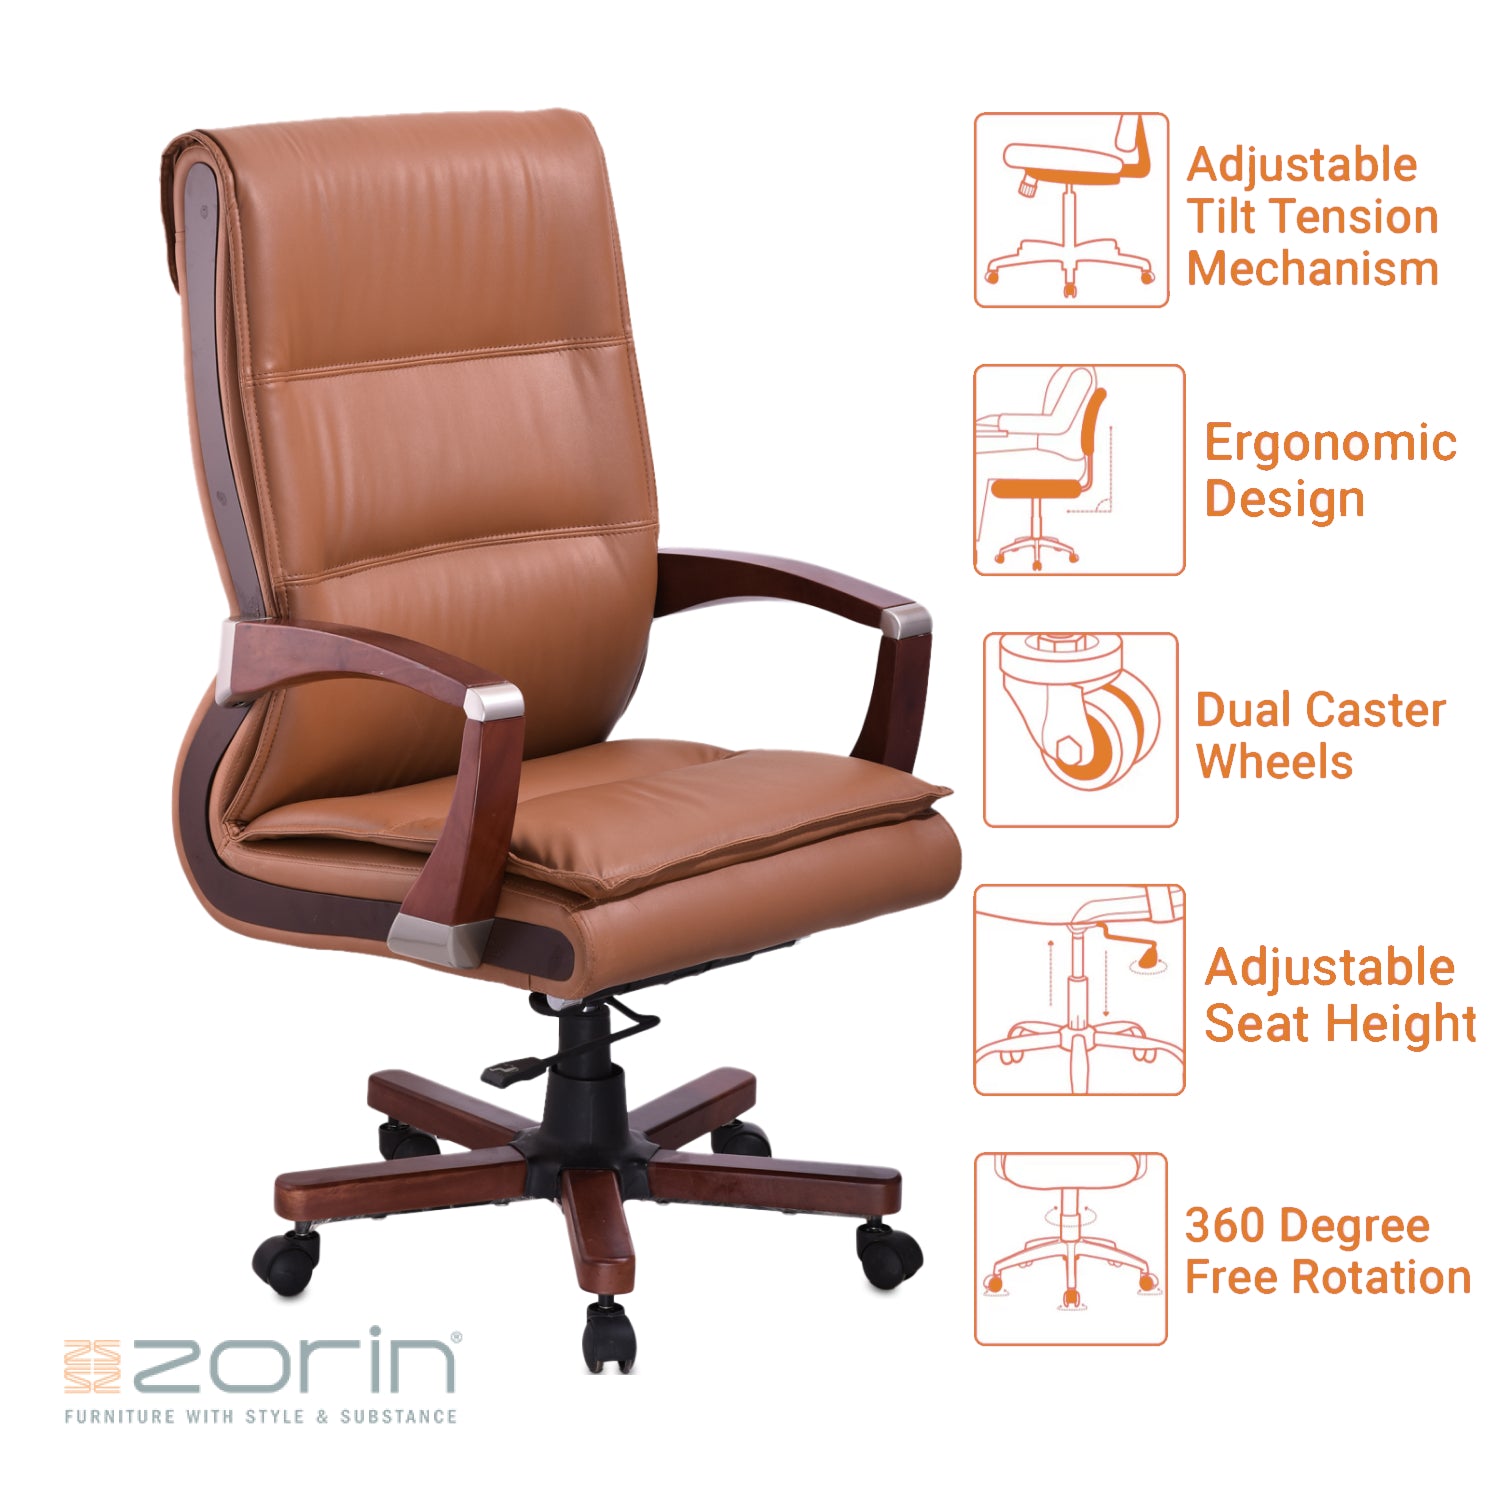 ZFB1001 High Back Chair by Zorin in Tan Color Zorin